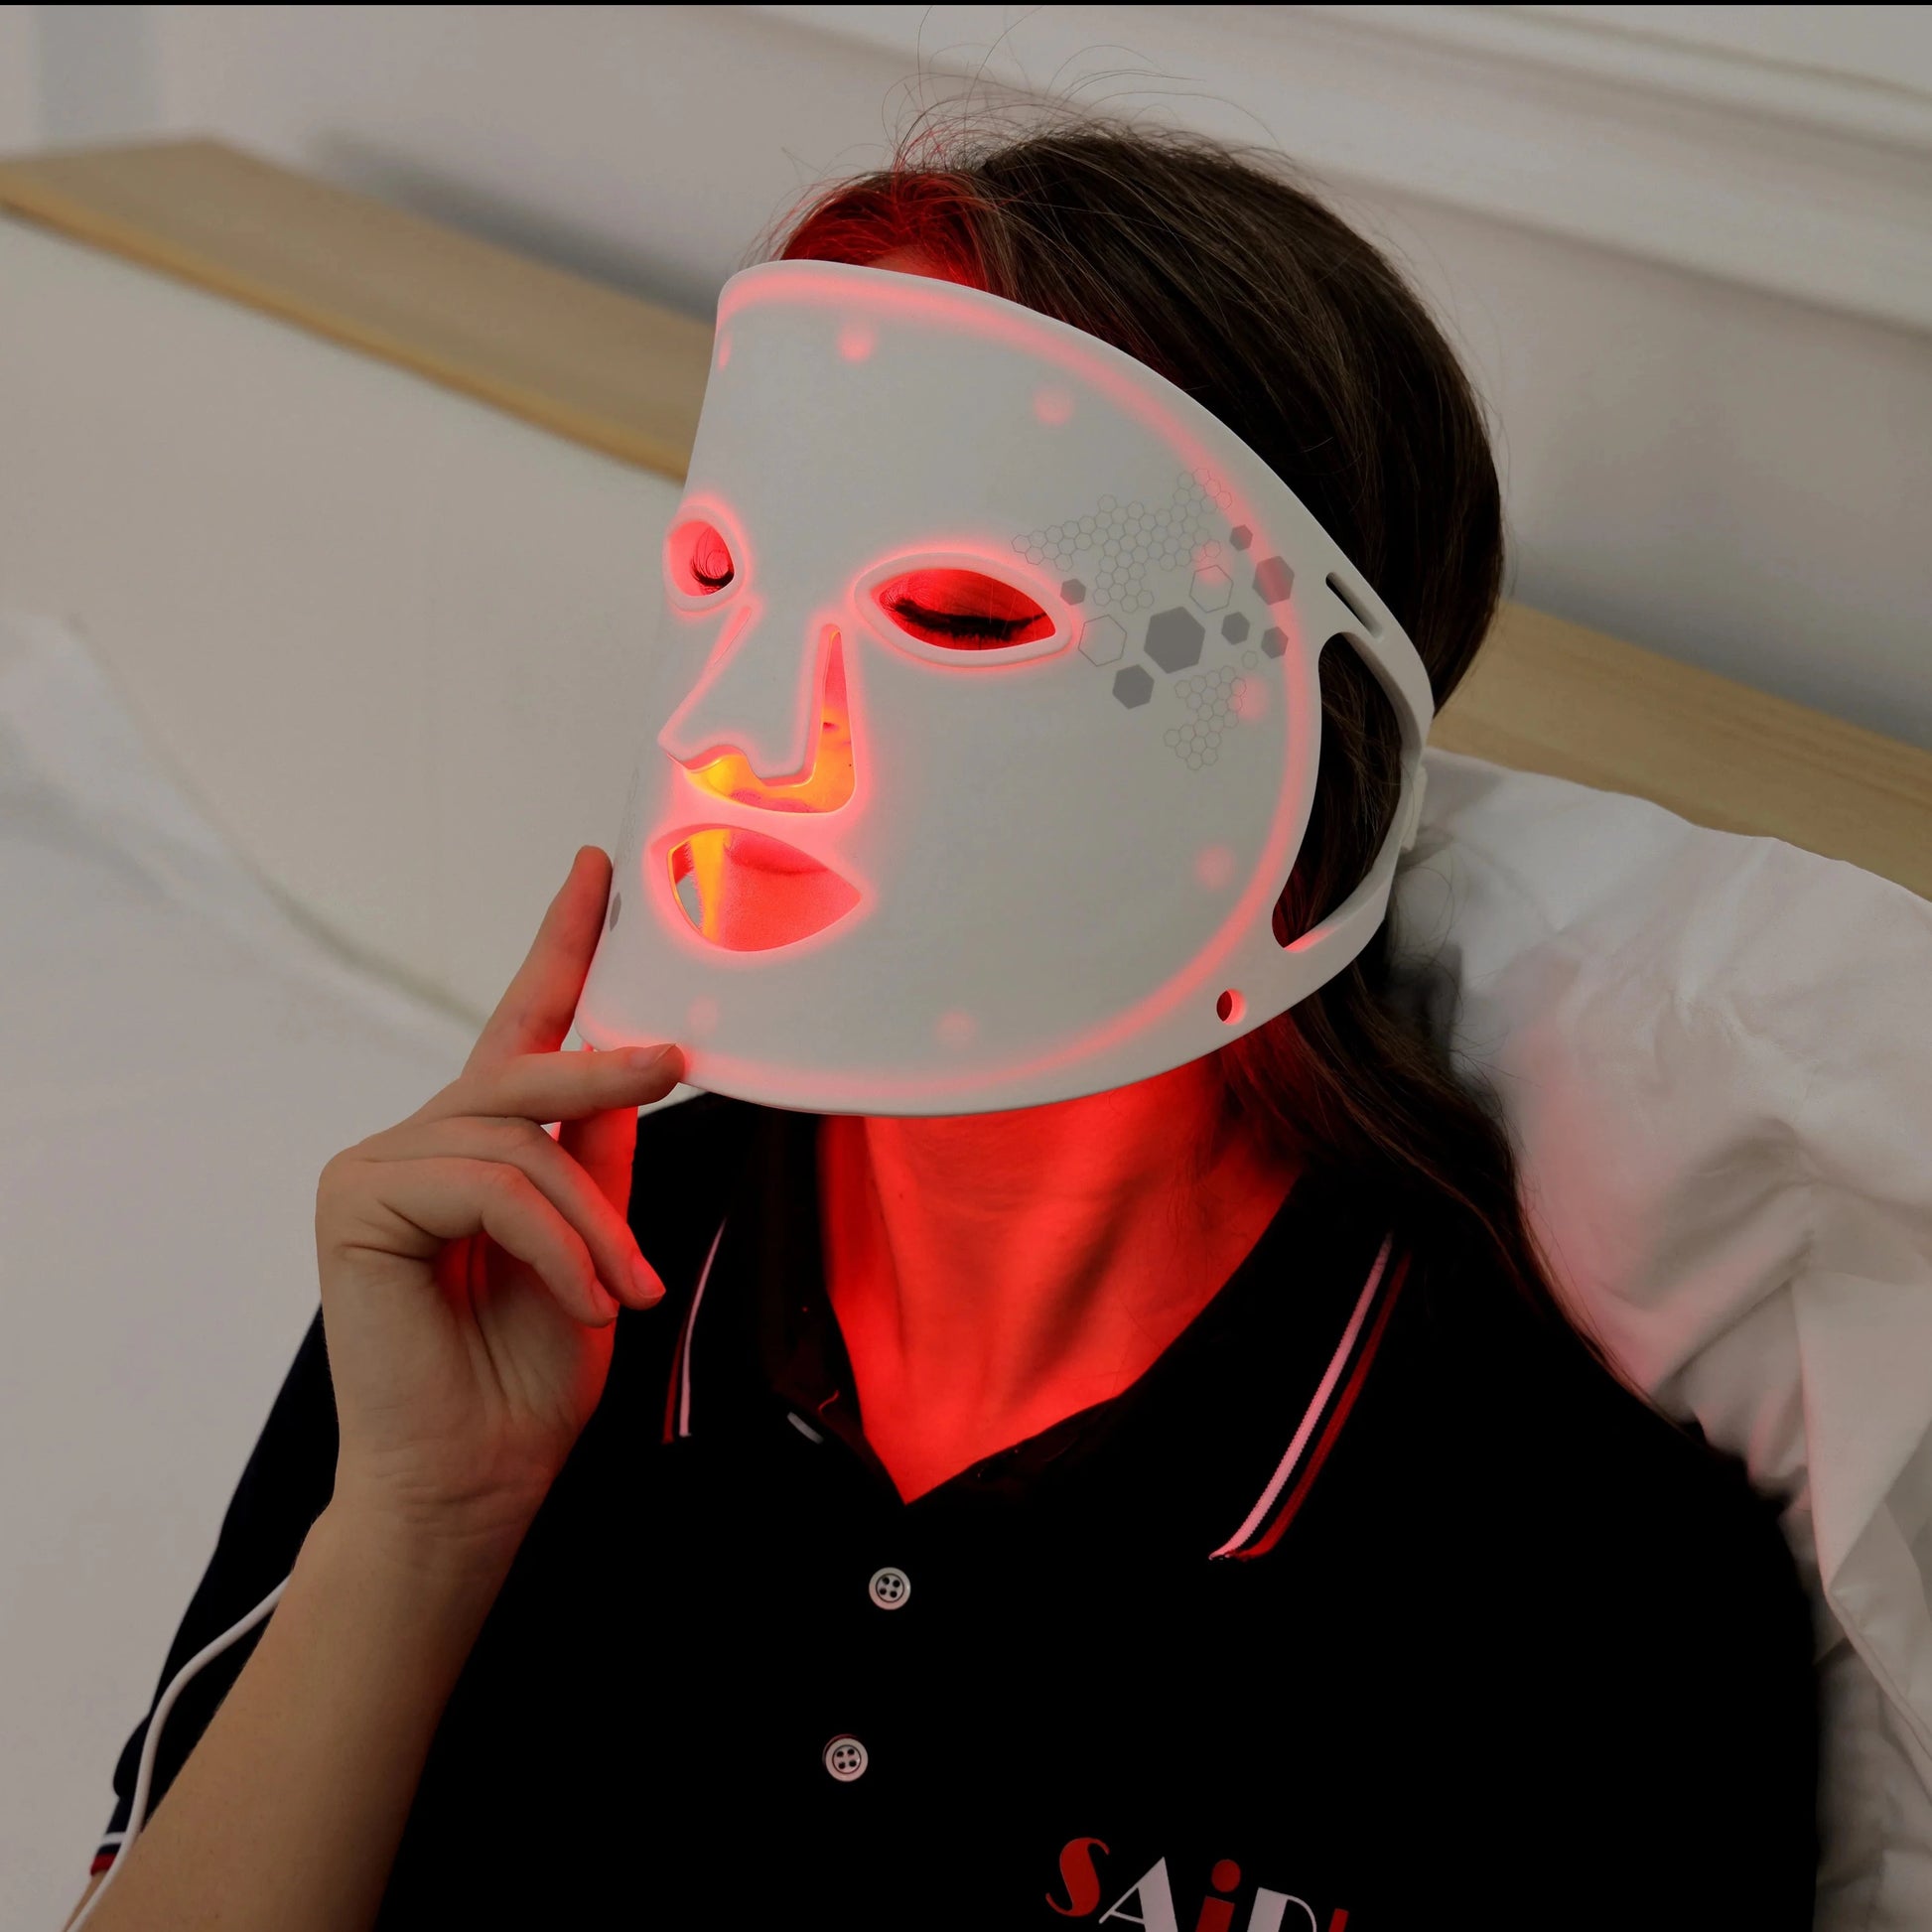 Model using the LED Light Therapy Mask